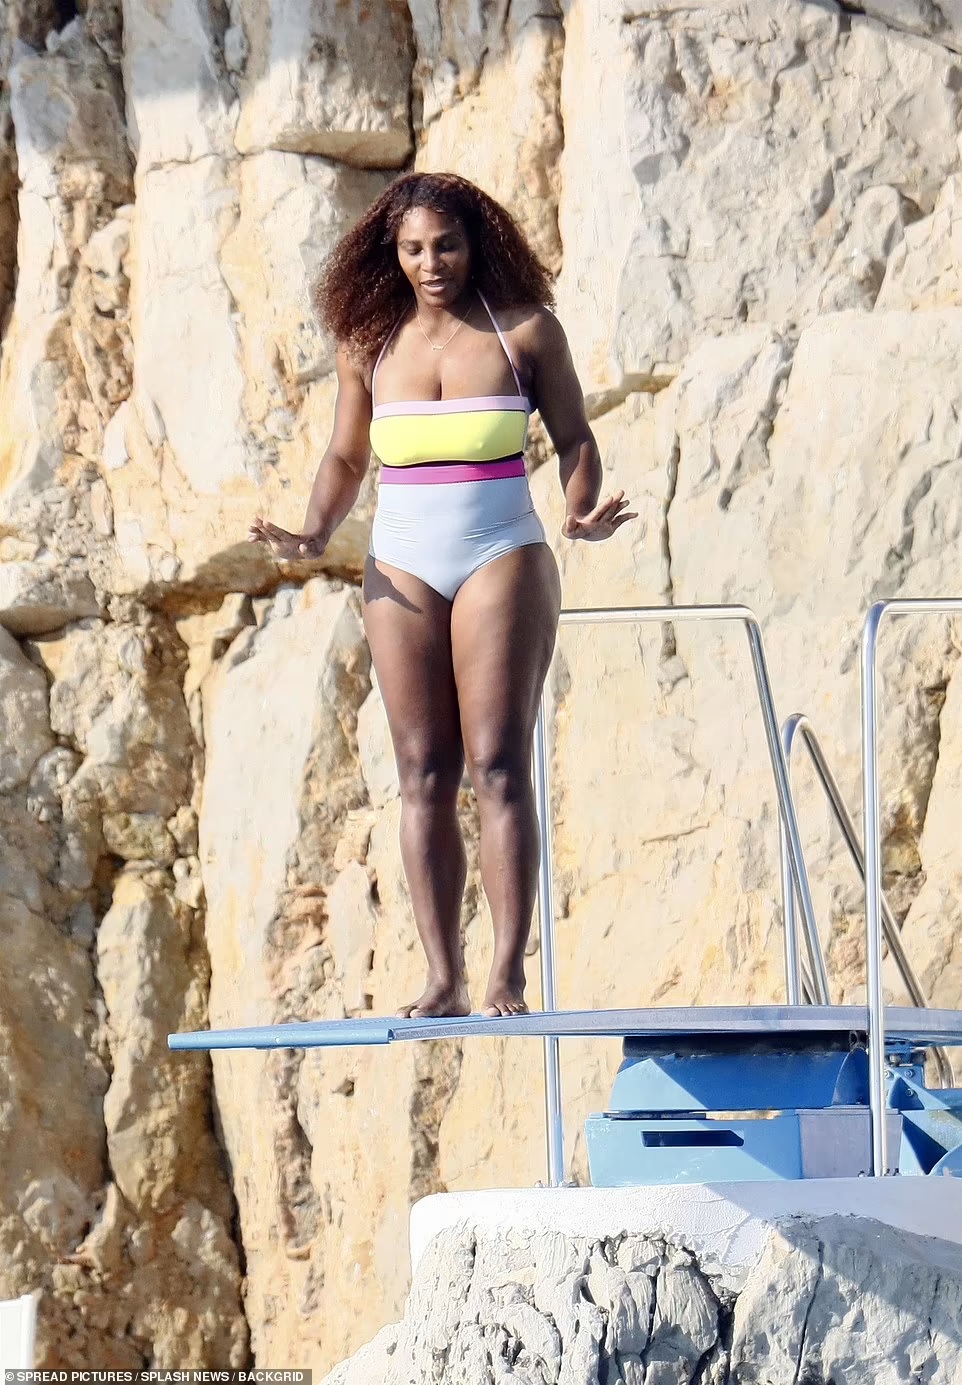 Serena Williams perched on the end of the blue diving board and put out her arms for some balance before jumping off